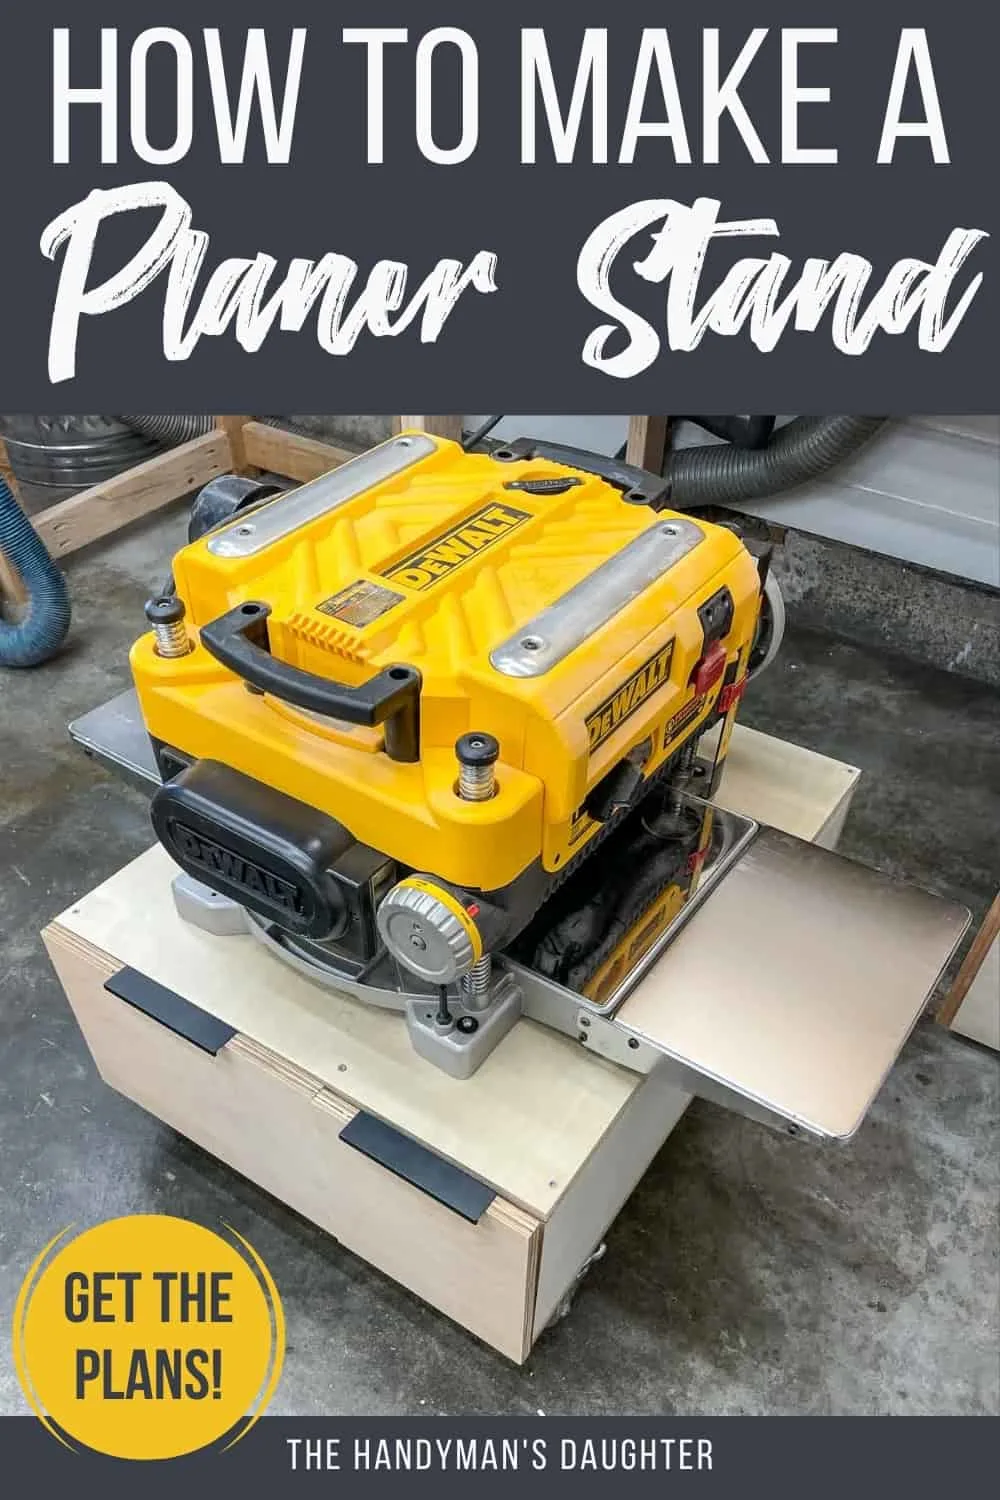 How to build a mobile planer stand!!!